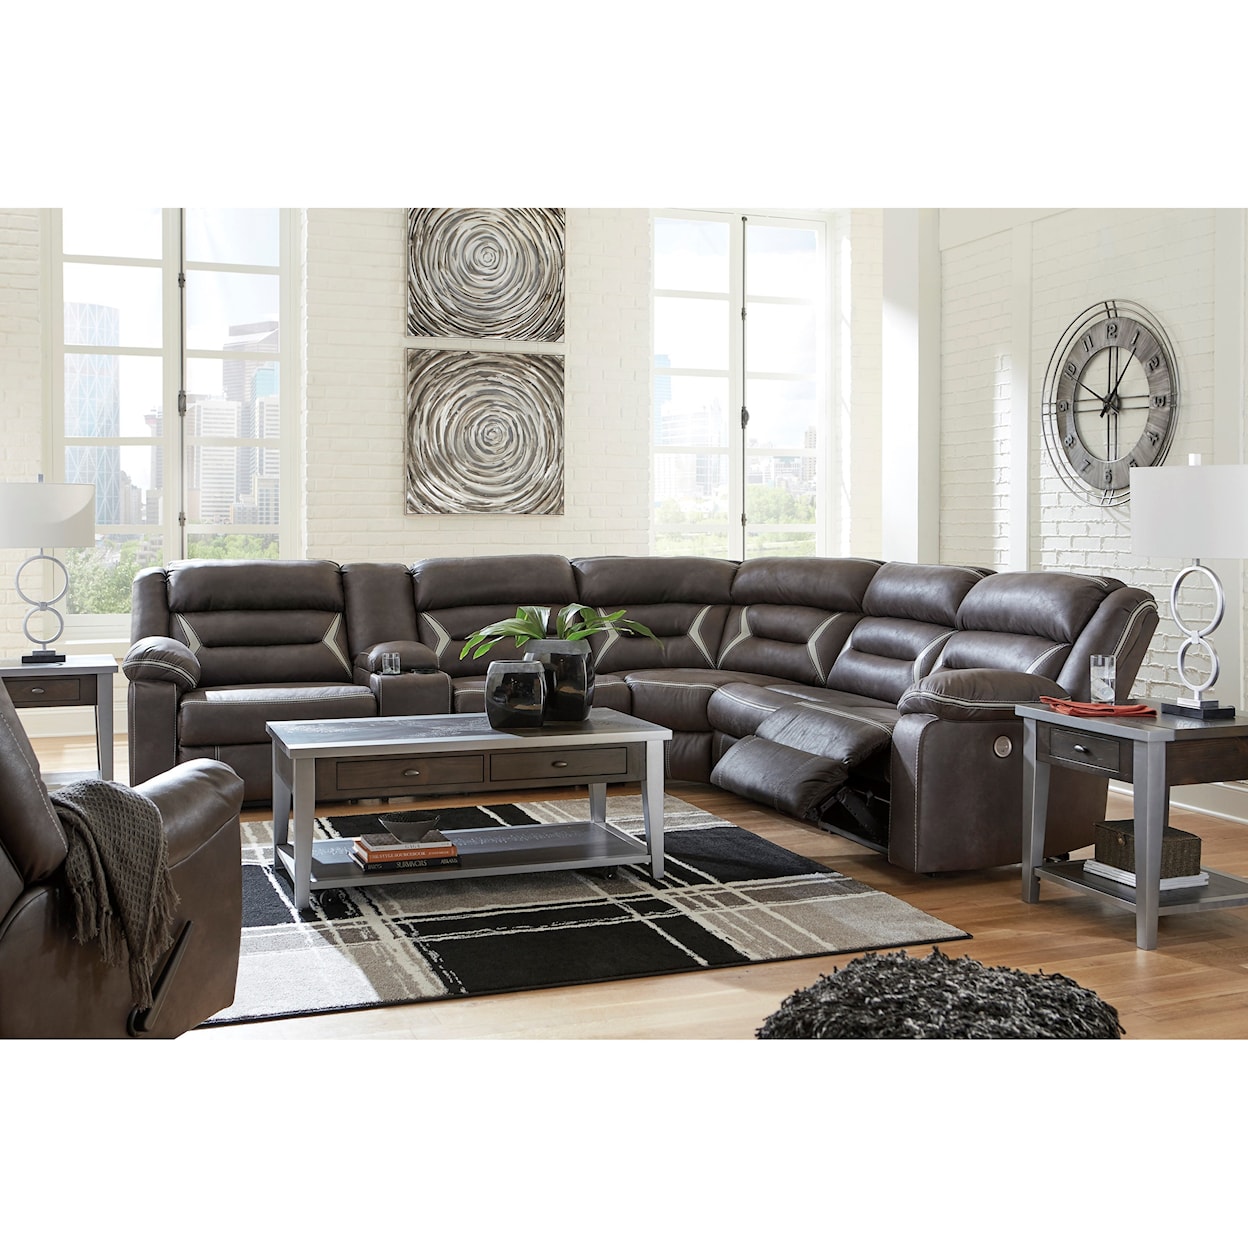 Signature Design Kincord Power Reclining Living Room Group